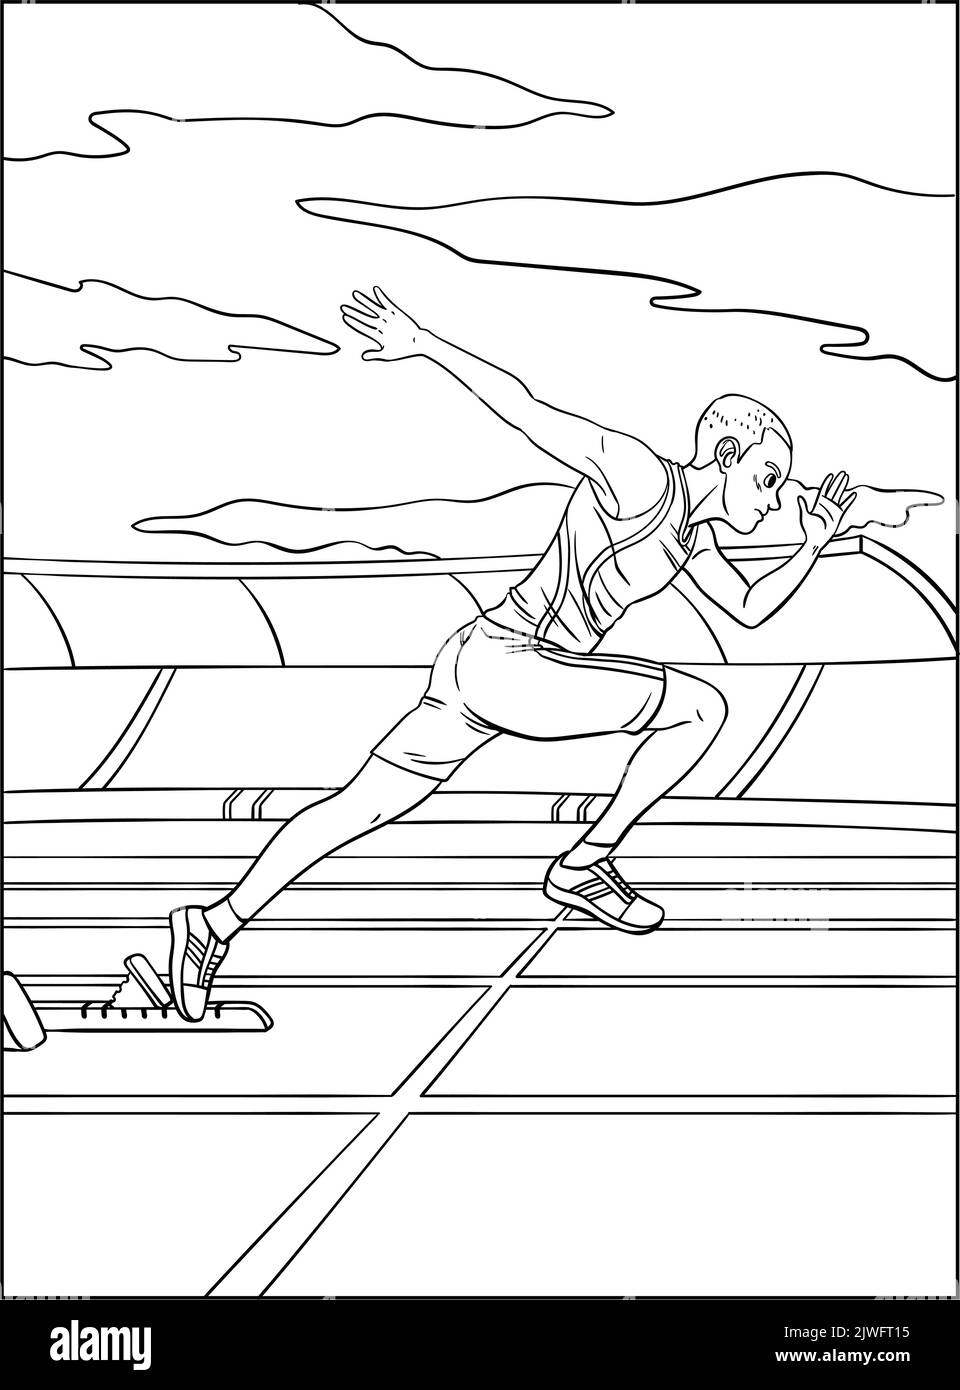 Sprinting Coloring Page for Kids Stock Vector